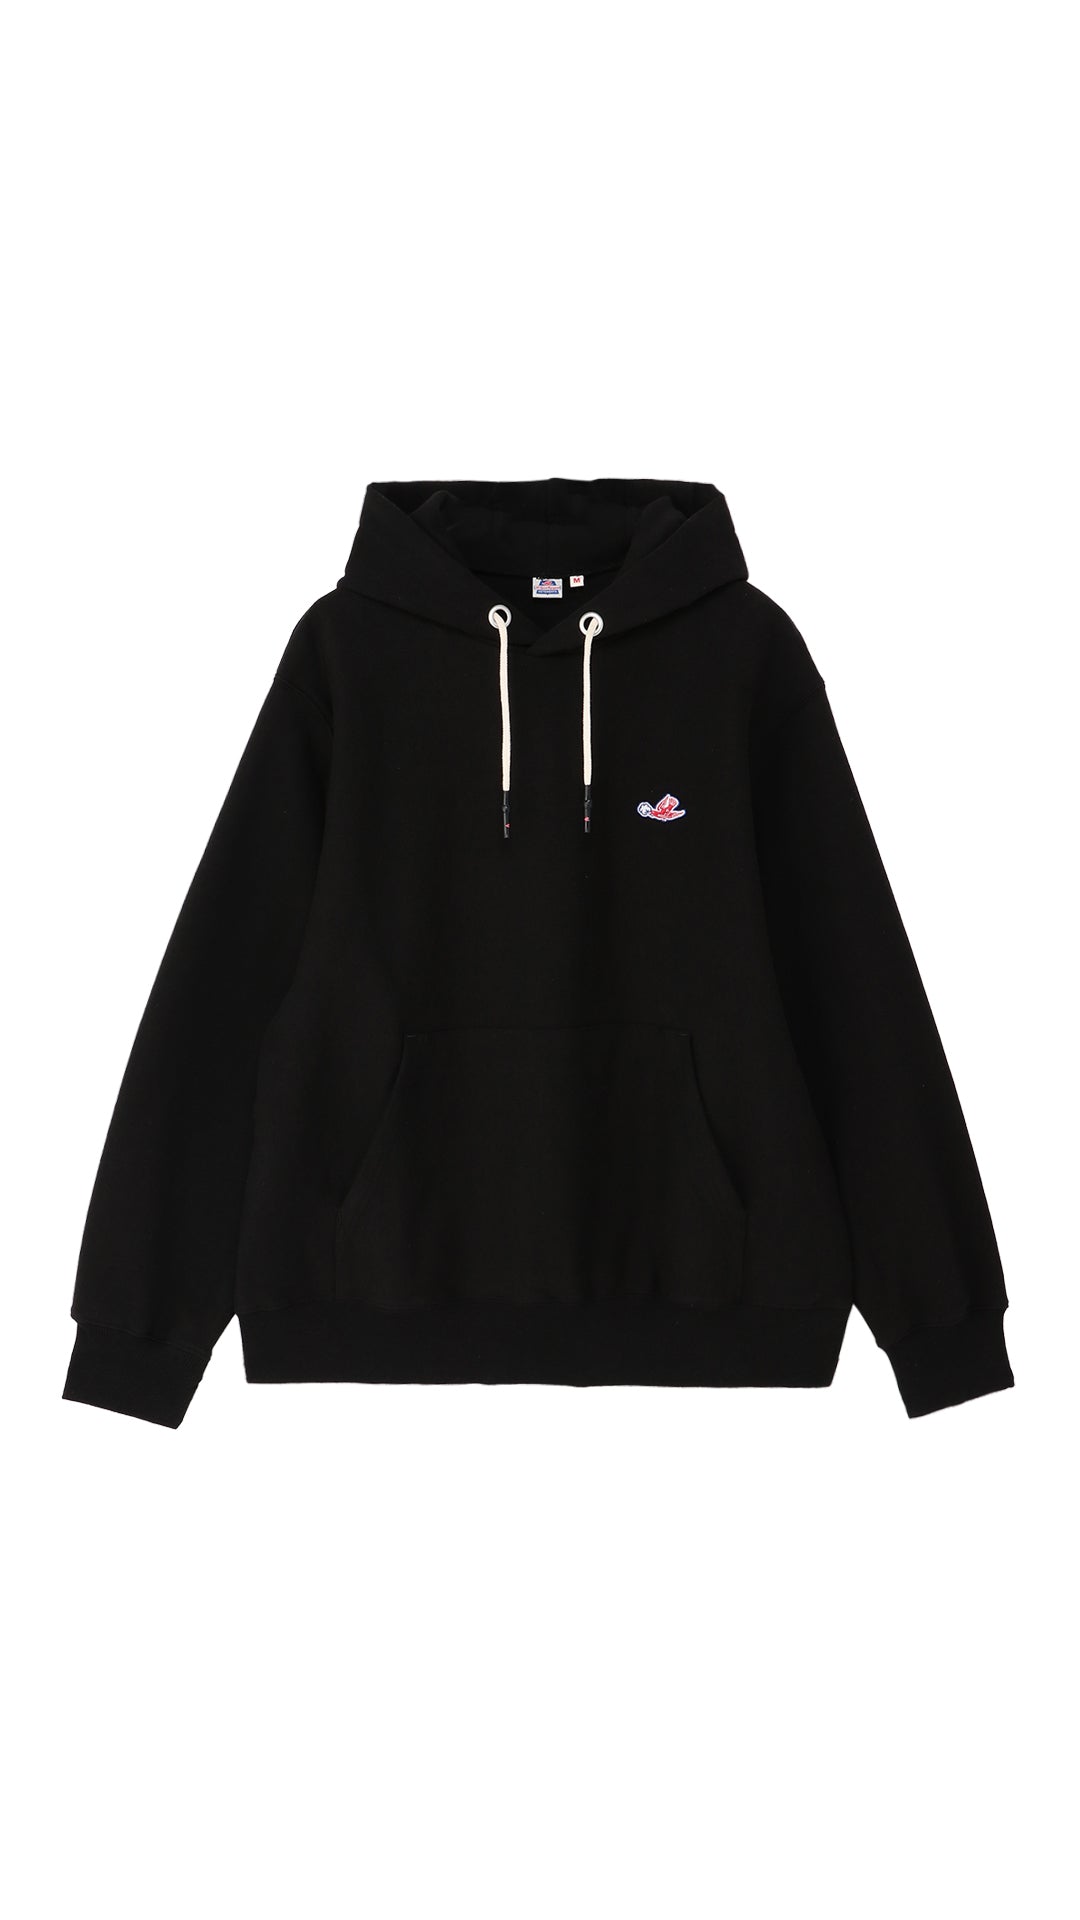 MESSAGE PULLOVER HOODIE